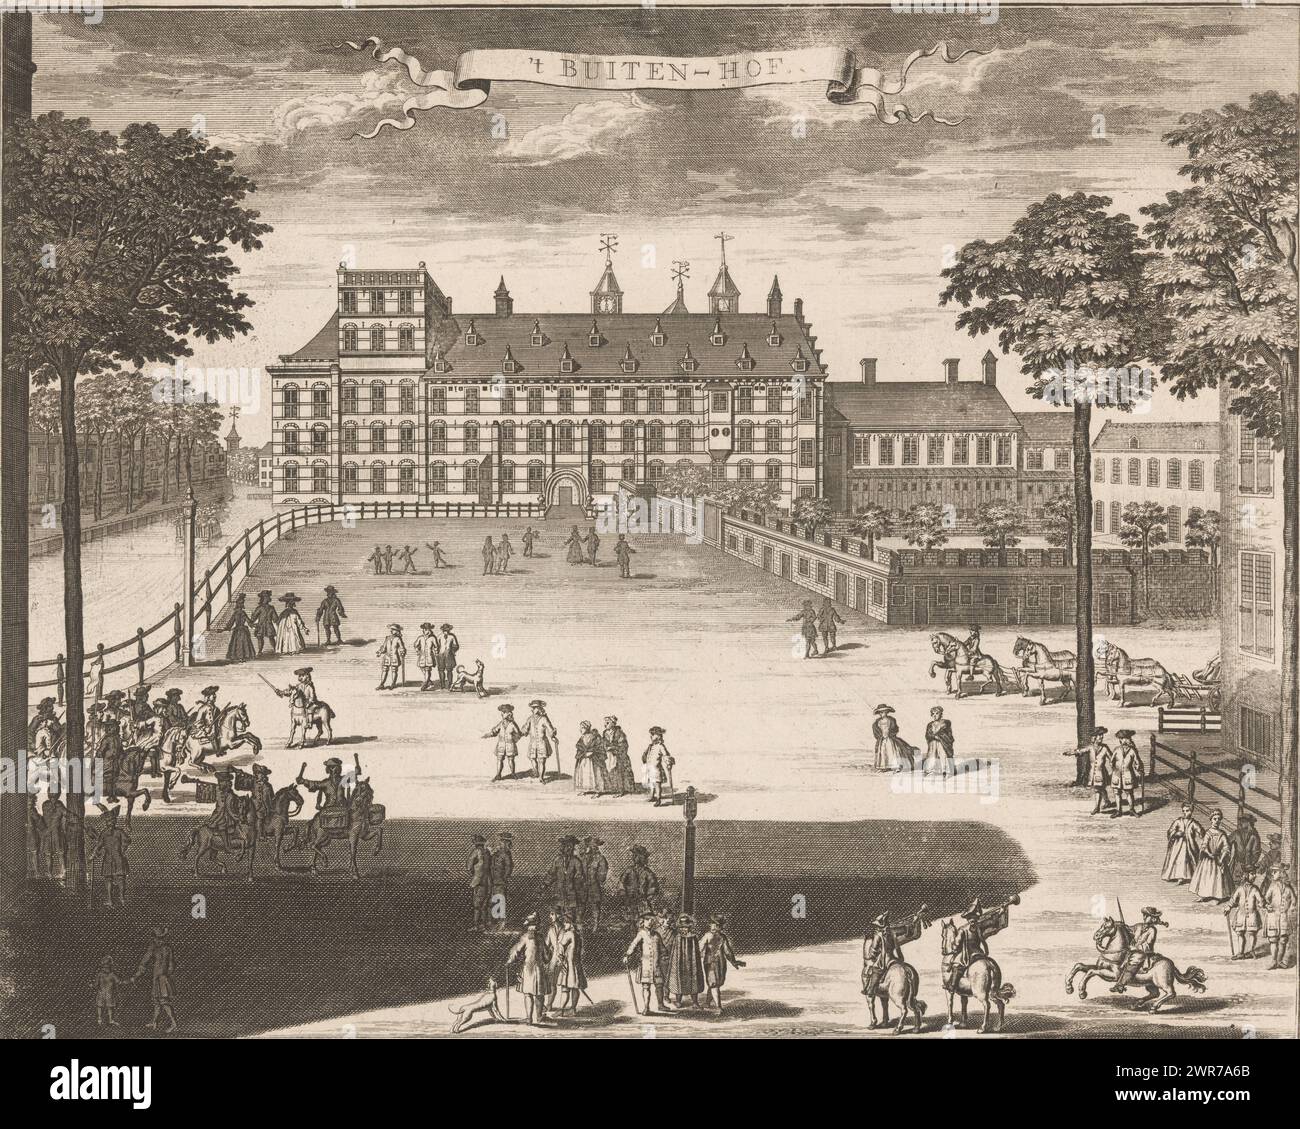 View of the Buitenhof in The Hague, 't Buiten-Hof (title on object), print maker: anonymous, after drawing by: Gerrit van Giessen, publisher: Reinier Boitet, publisher: Delft, publisher: Amsterdam, 1730 - 1736, paper, etching, engraving, height 280 mm × width 351 mm, print Stock Photo